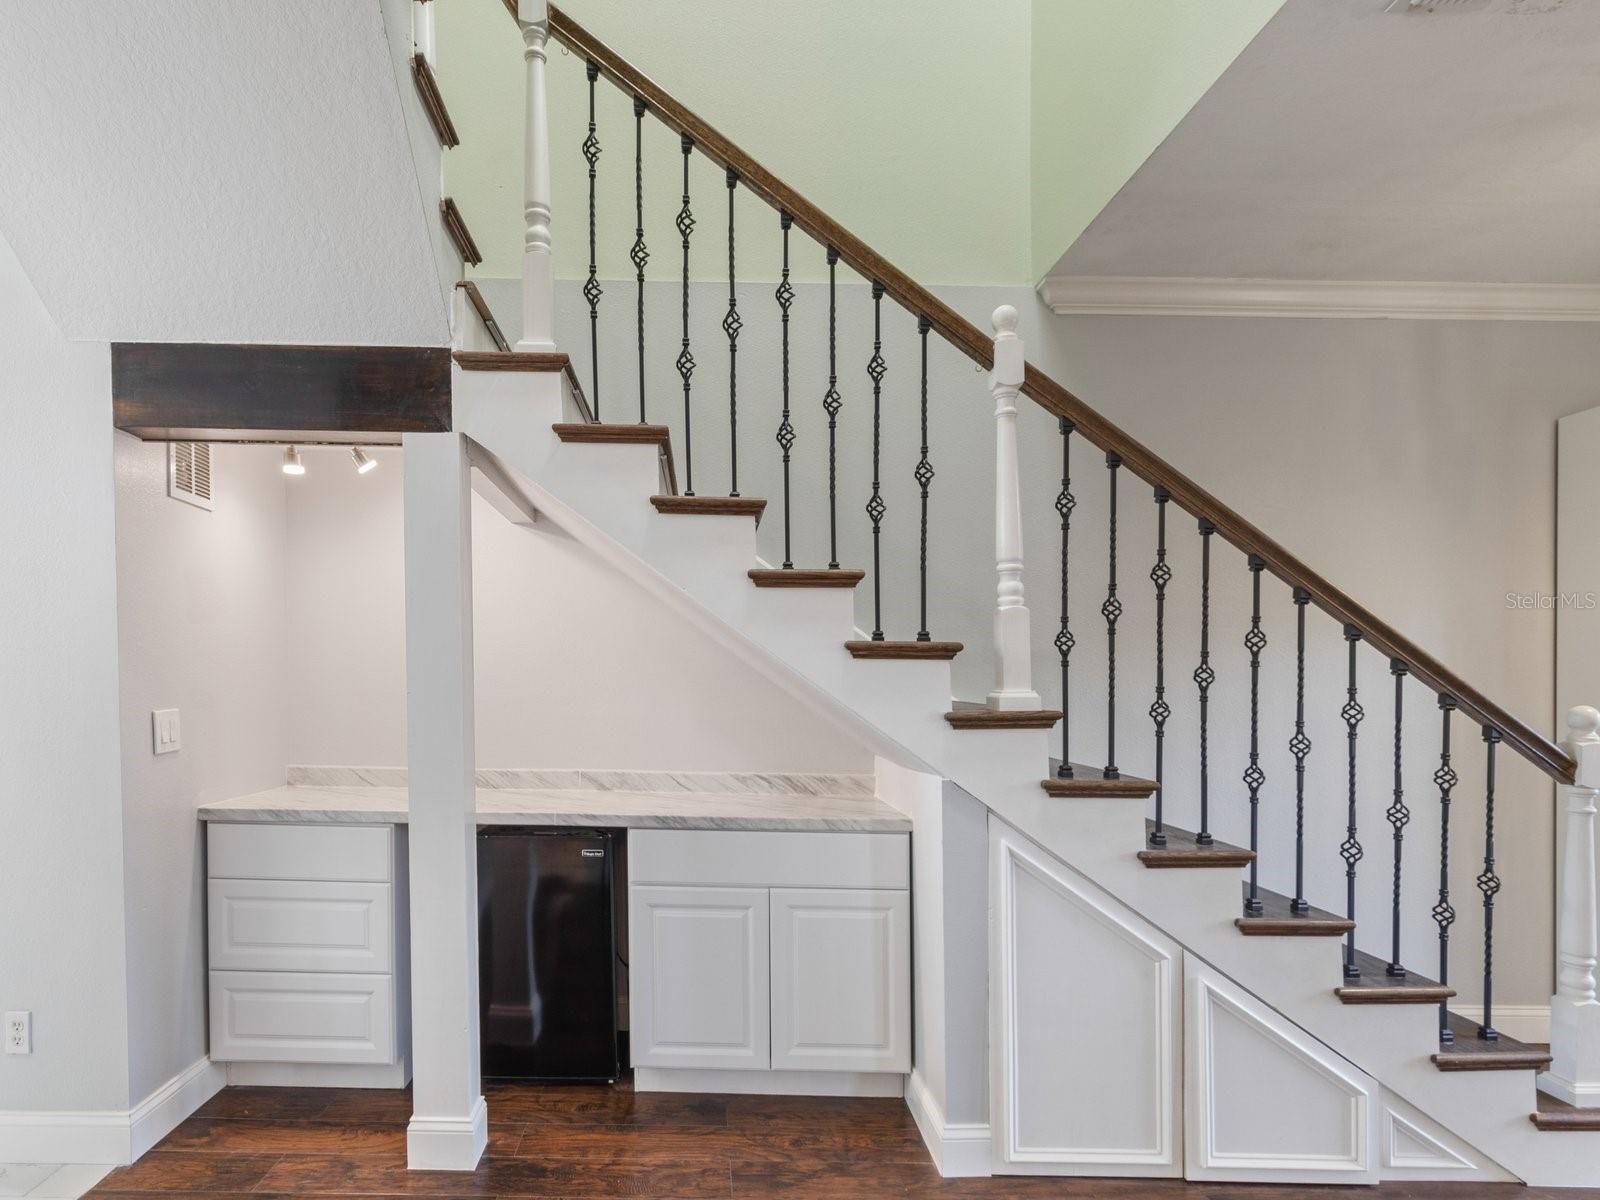 Reconfigured staircase with built-ins and mini fridge underneath